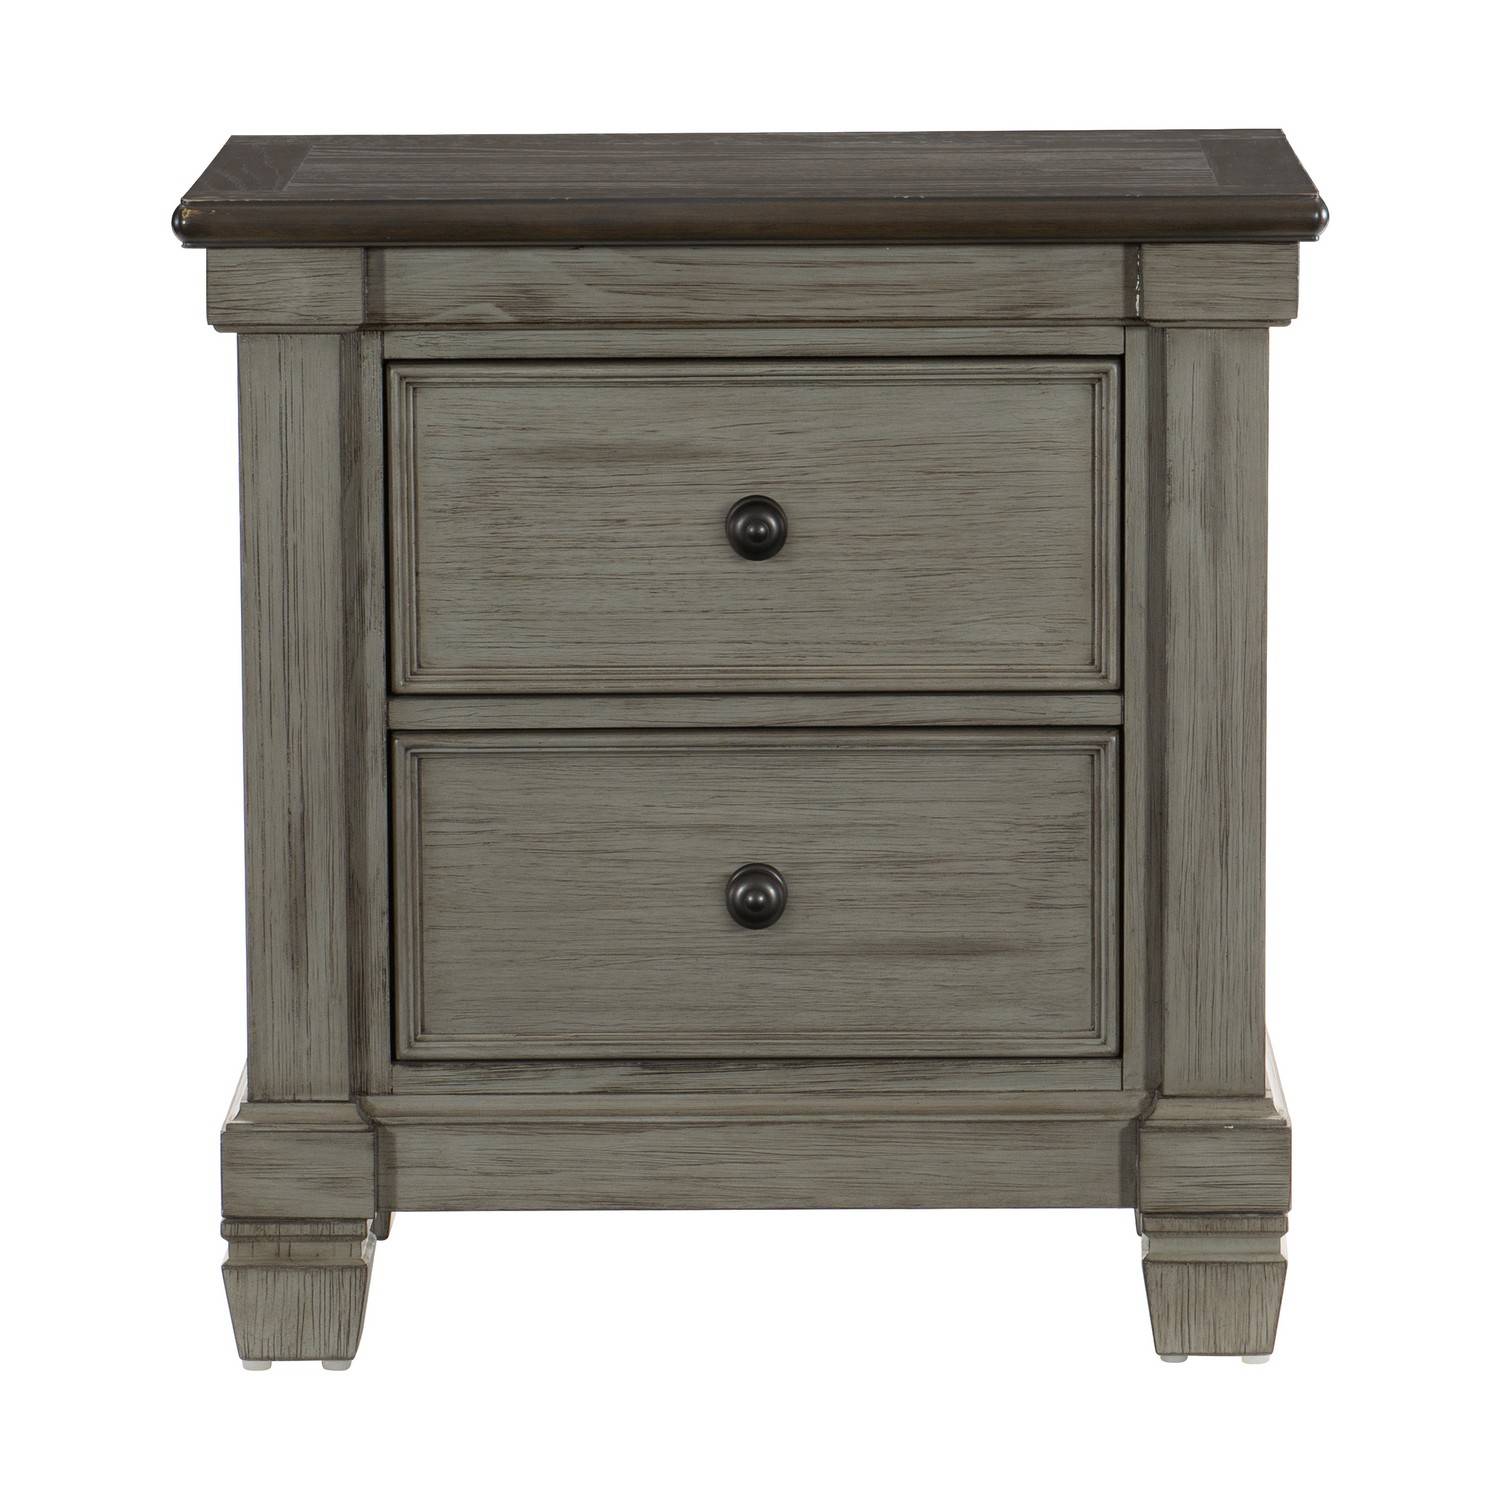 Homelegance Weaver Night Stand - Two-tone : Antique Gray And Coffee